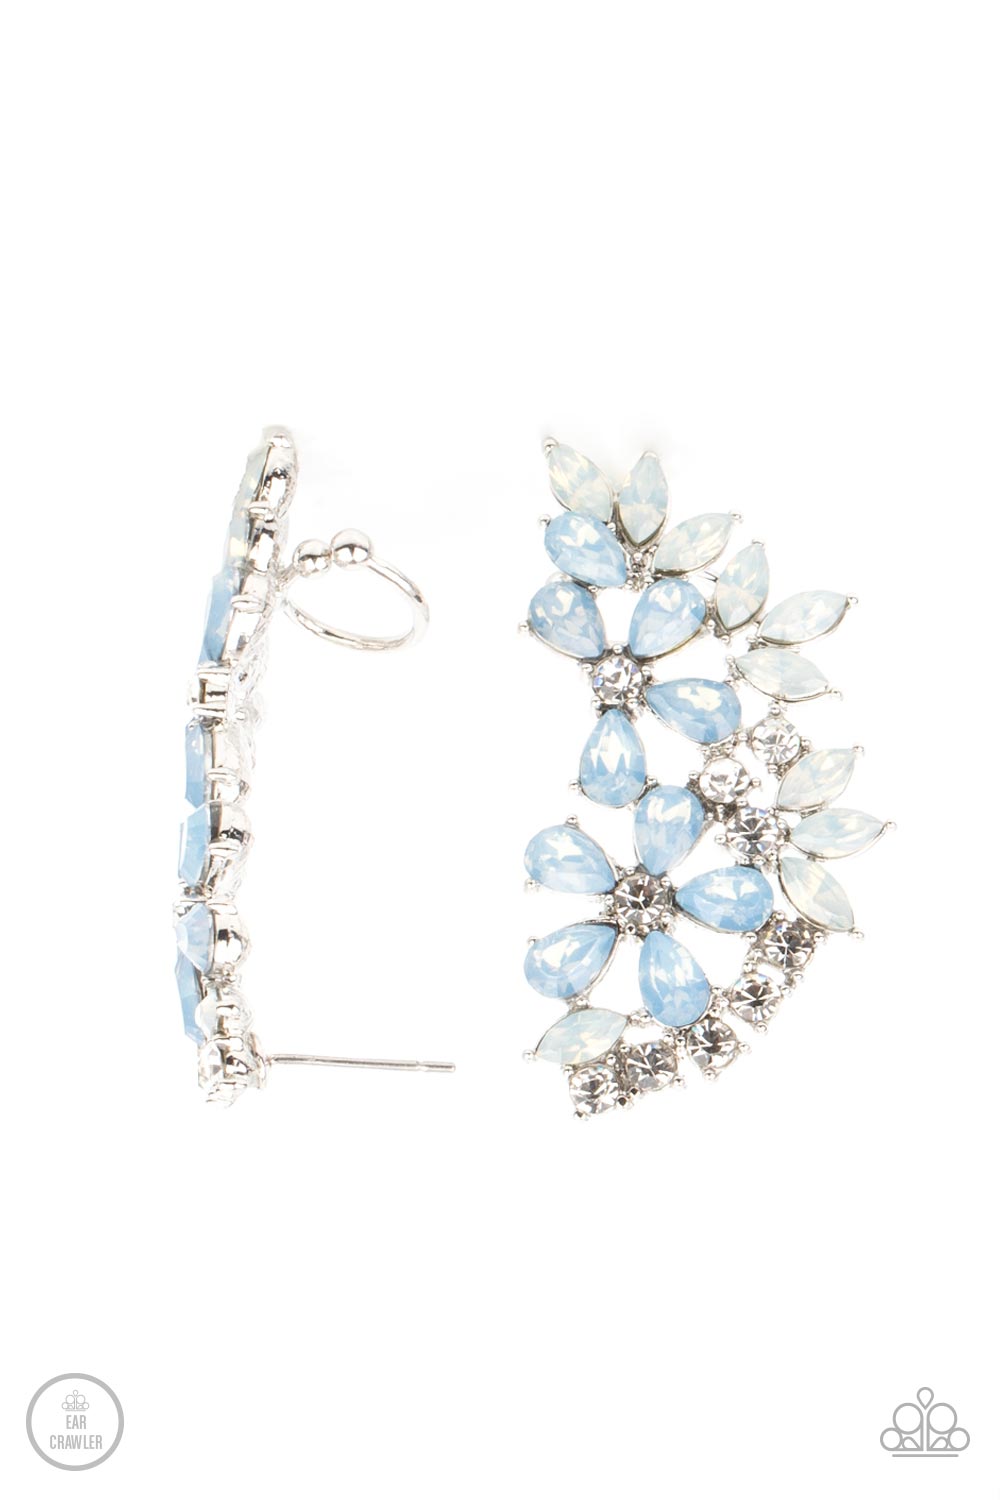  milky opalescence, white marquise and Cerulean teardrop rhinestones coalesce into a sparkly floral centerpiece that flawlessly climbs the ear